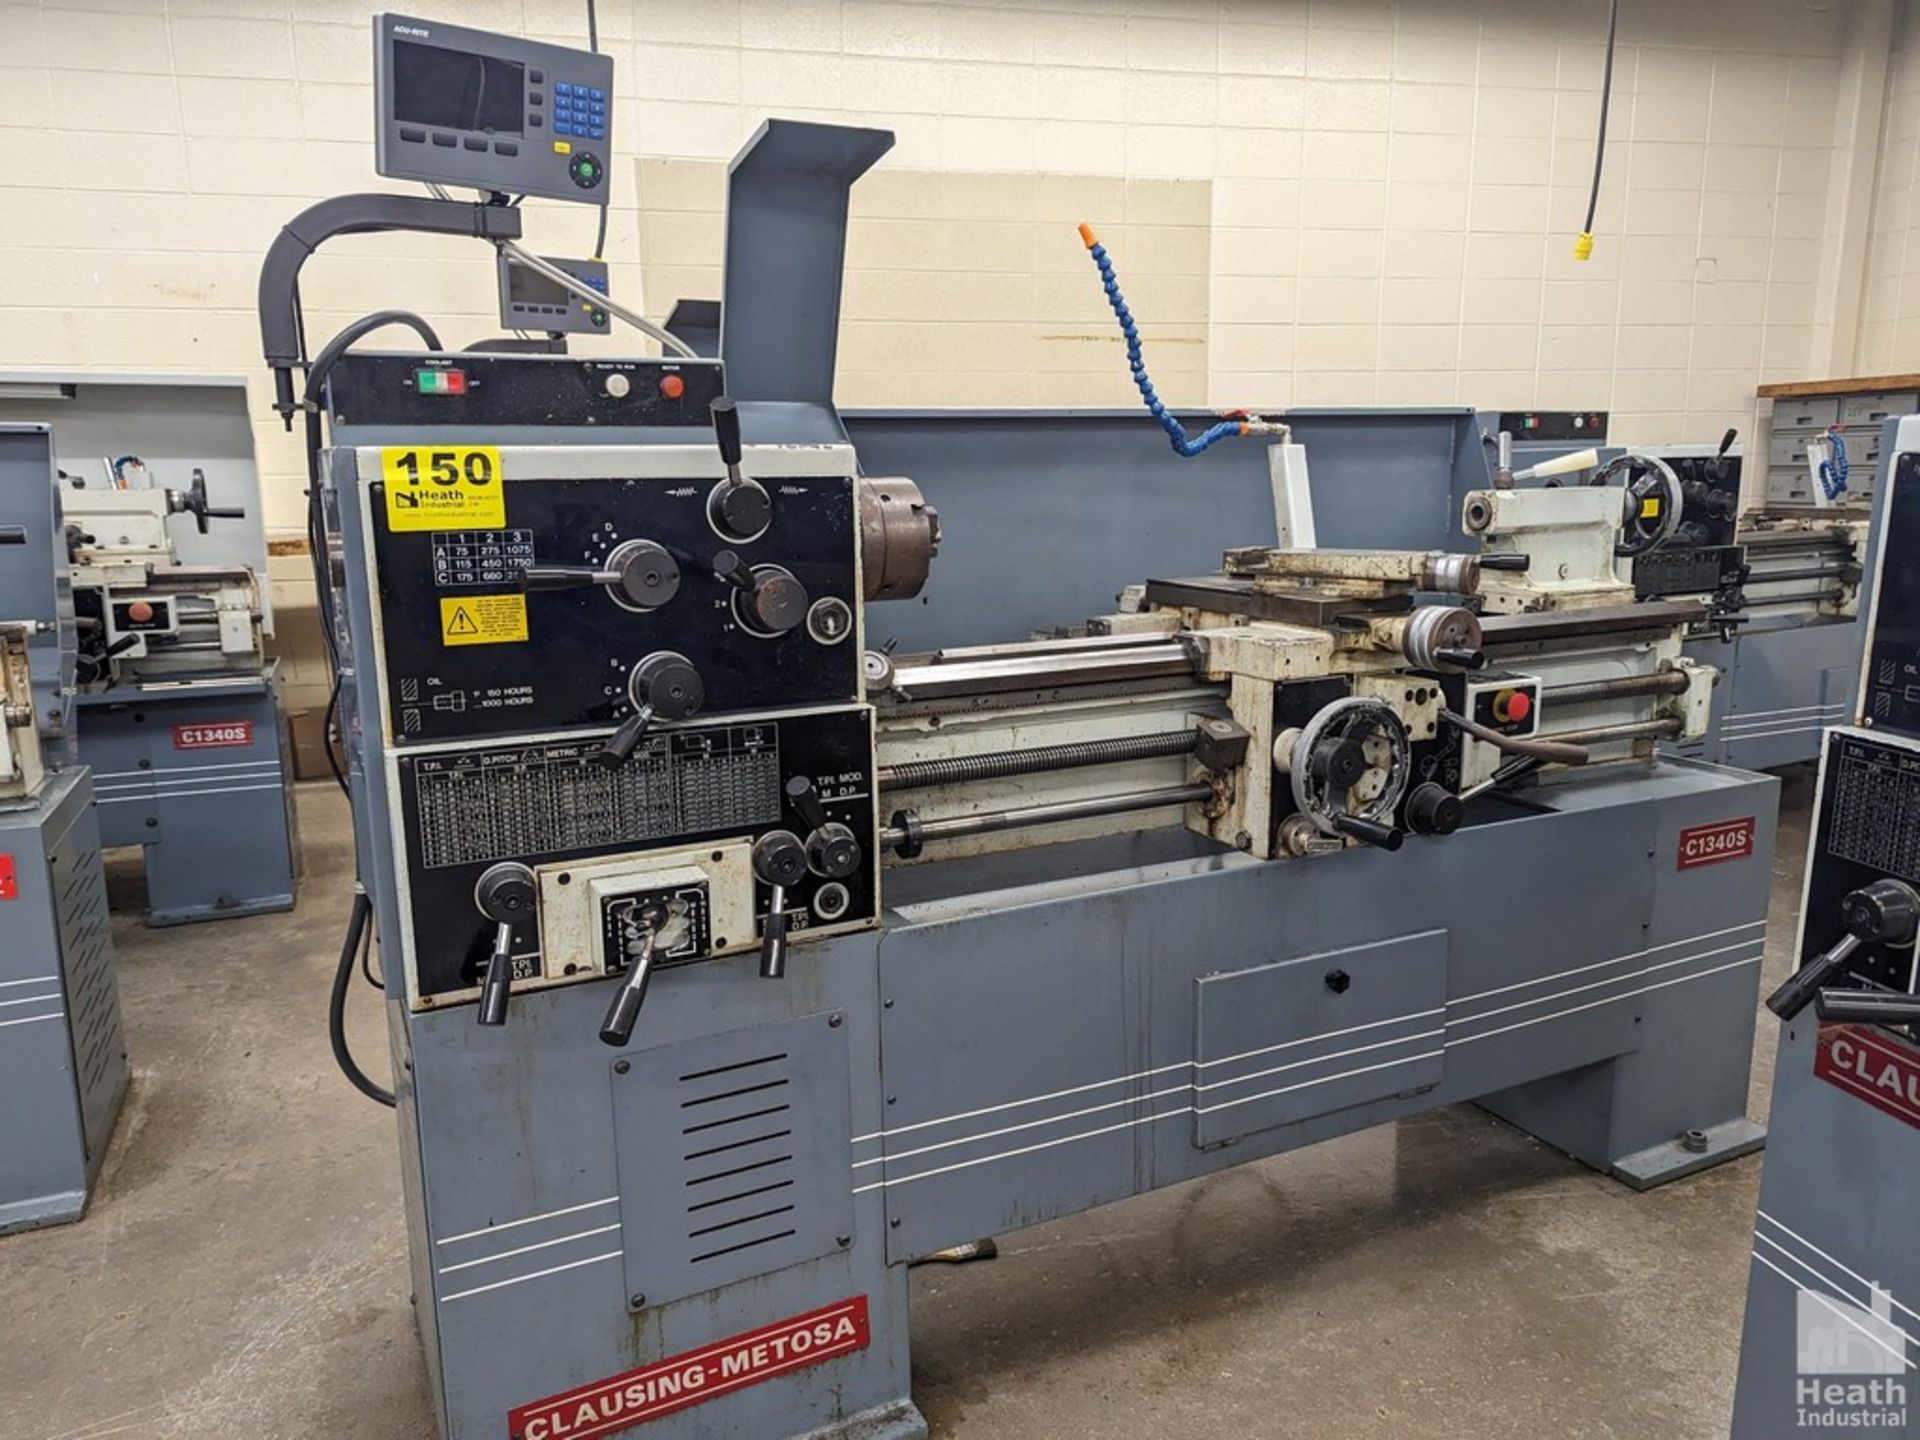 CLAUSING-METOSA 13"X40" MODEL 1340S TOOLROOM LATHE, S/N 41532, 2500 SPINDLE RPM, WITH TAPER